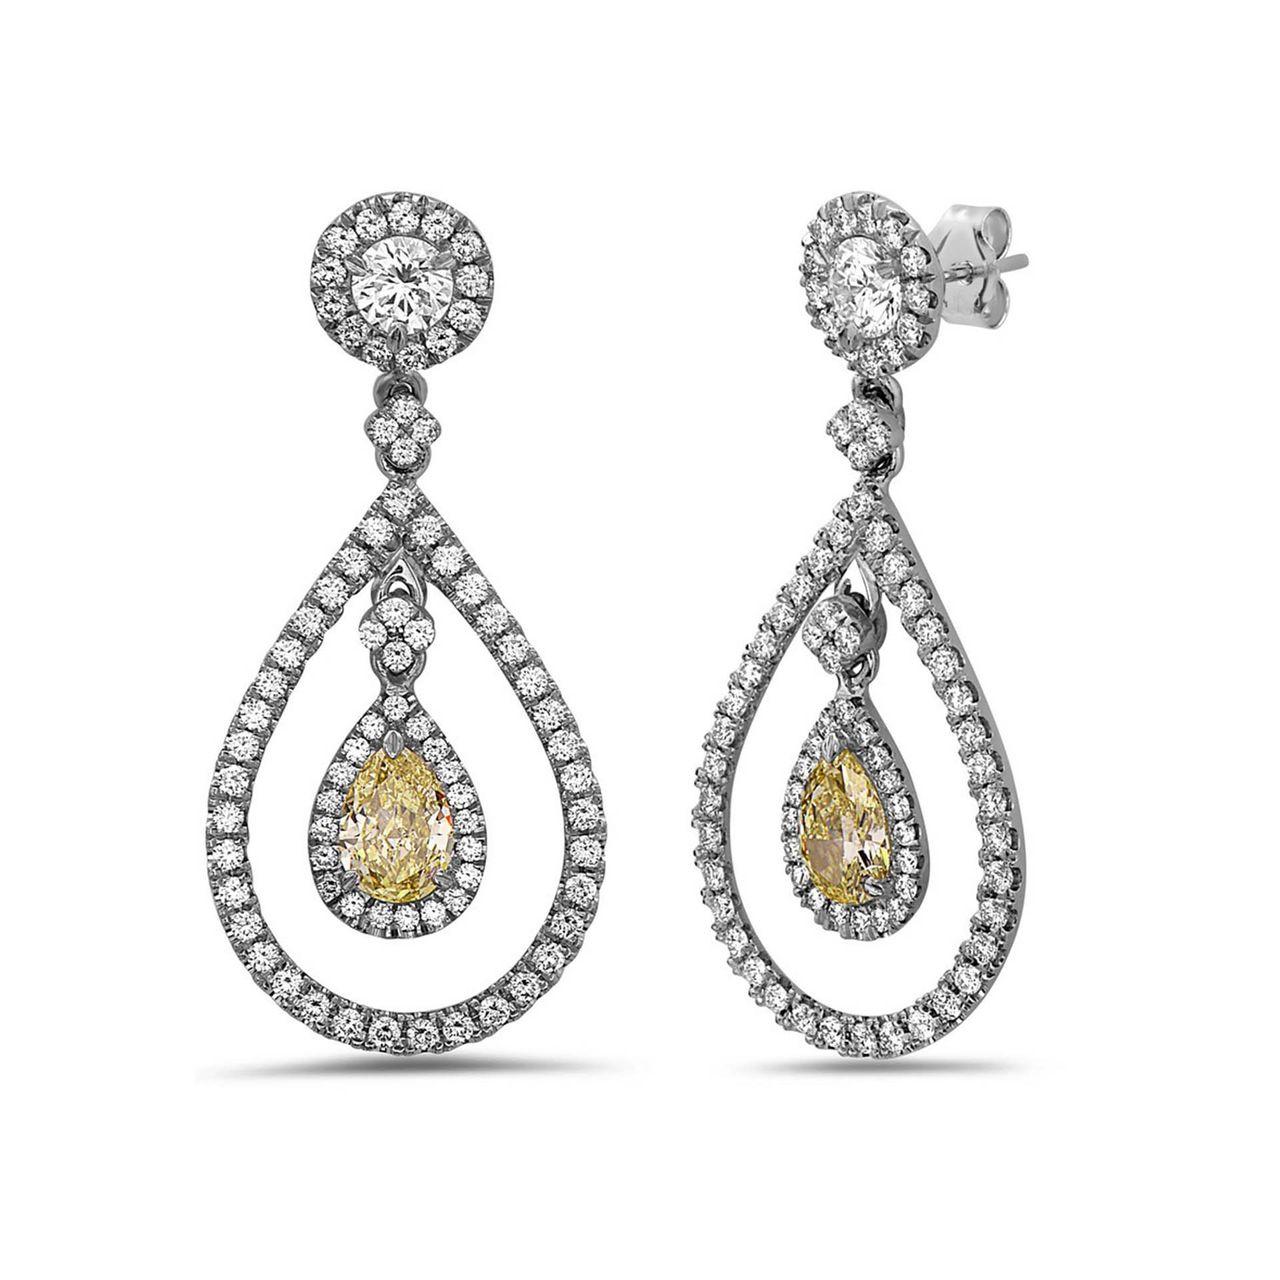 Ladies elegant Diamond drop earrings
 2 Pear-shaped Diamonds 0.85 carat Fancy Yellow 
Total Weight Surrounded by 1.00 carat round brilliant Diamonds VS clarity F\G color
 2 round shaped diamonds on top 0.20 carat each 
Earrings are mounted in